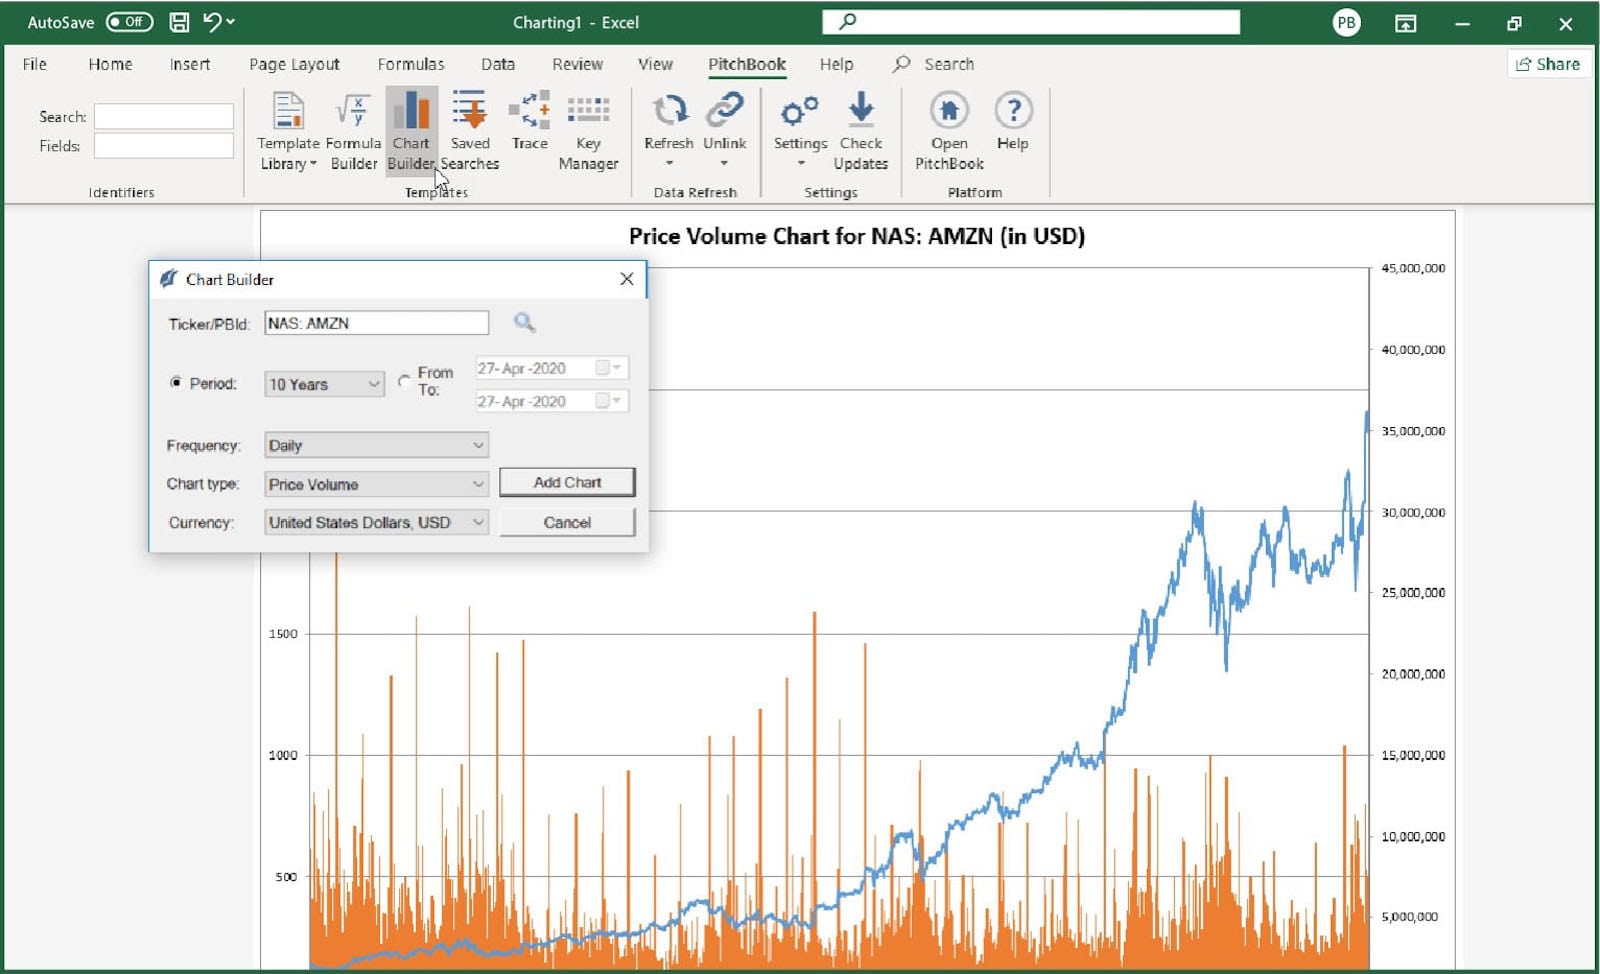 PitchBook Excel Plugin 10 year price volume chart for NAS: AMZN in USD 